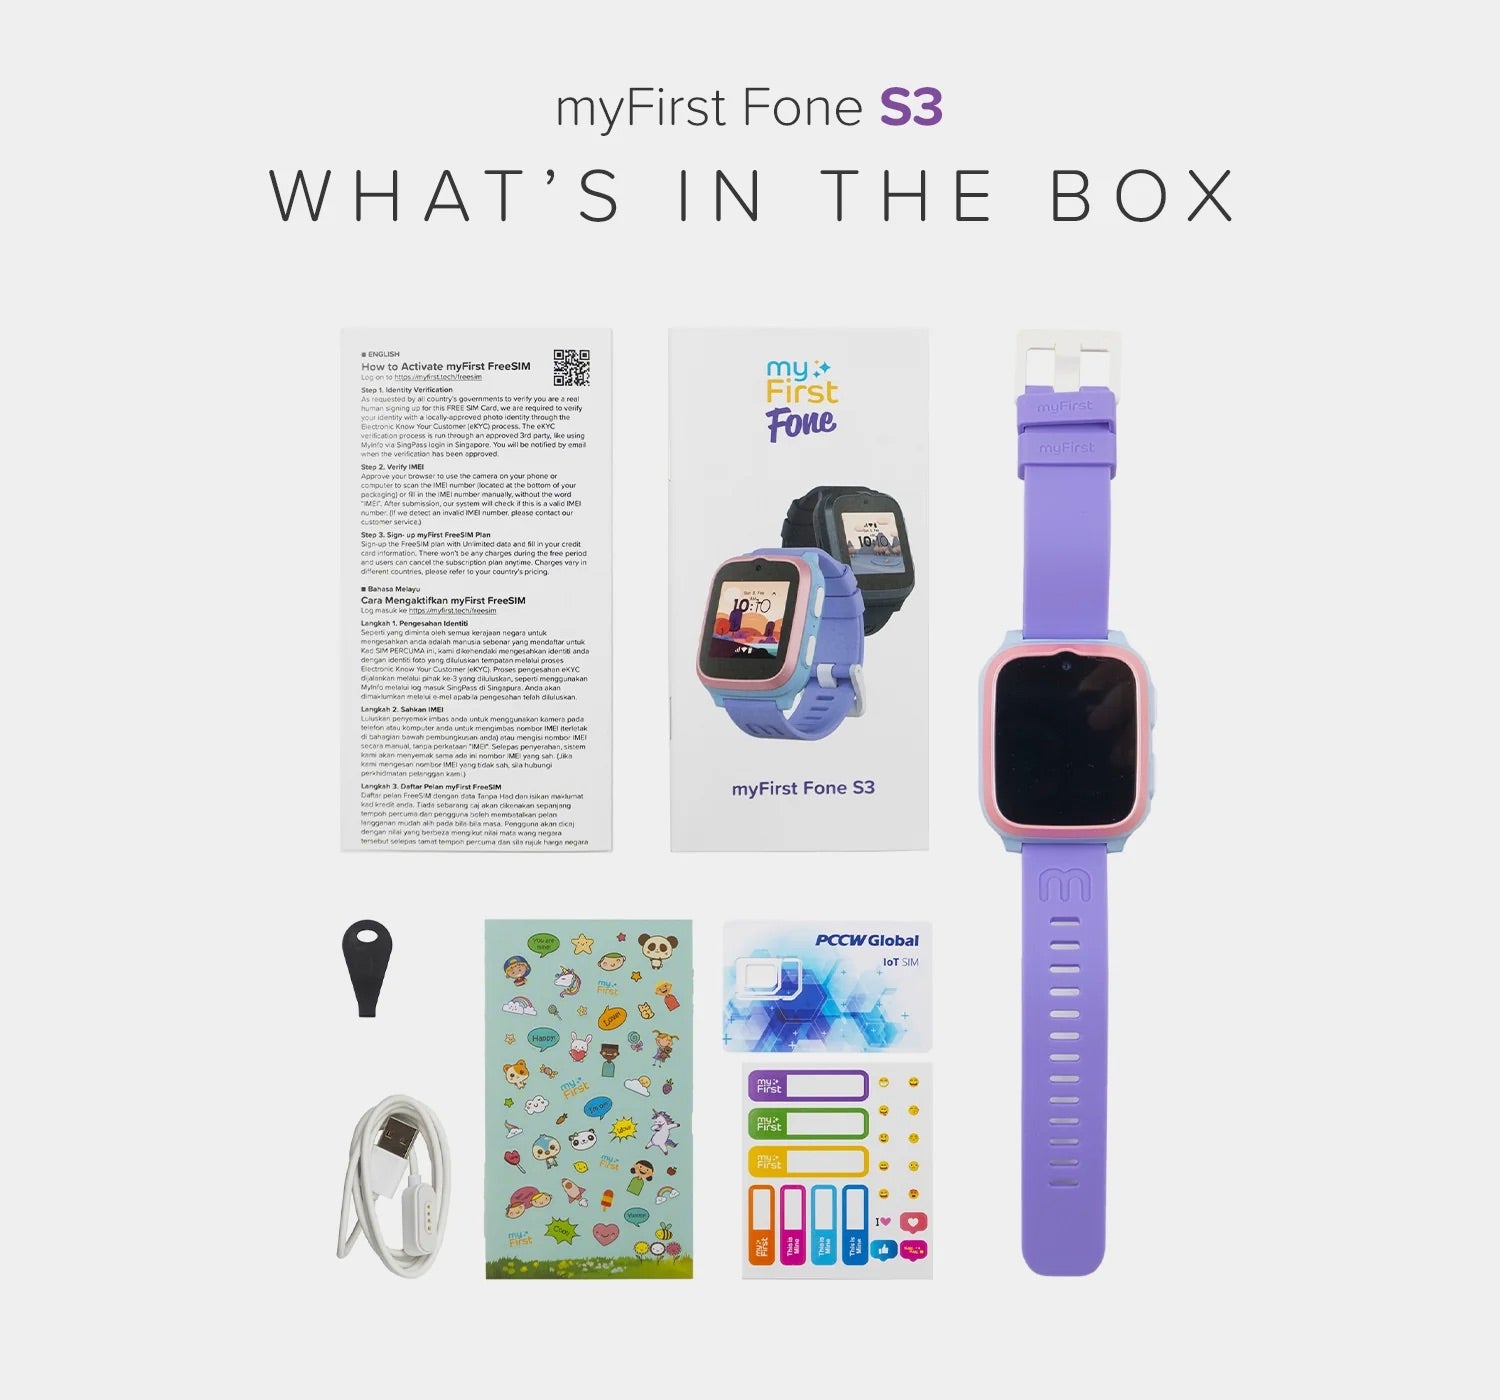 myFirst Fone S3 4G Music Smartwatch phone with GPS